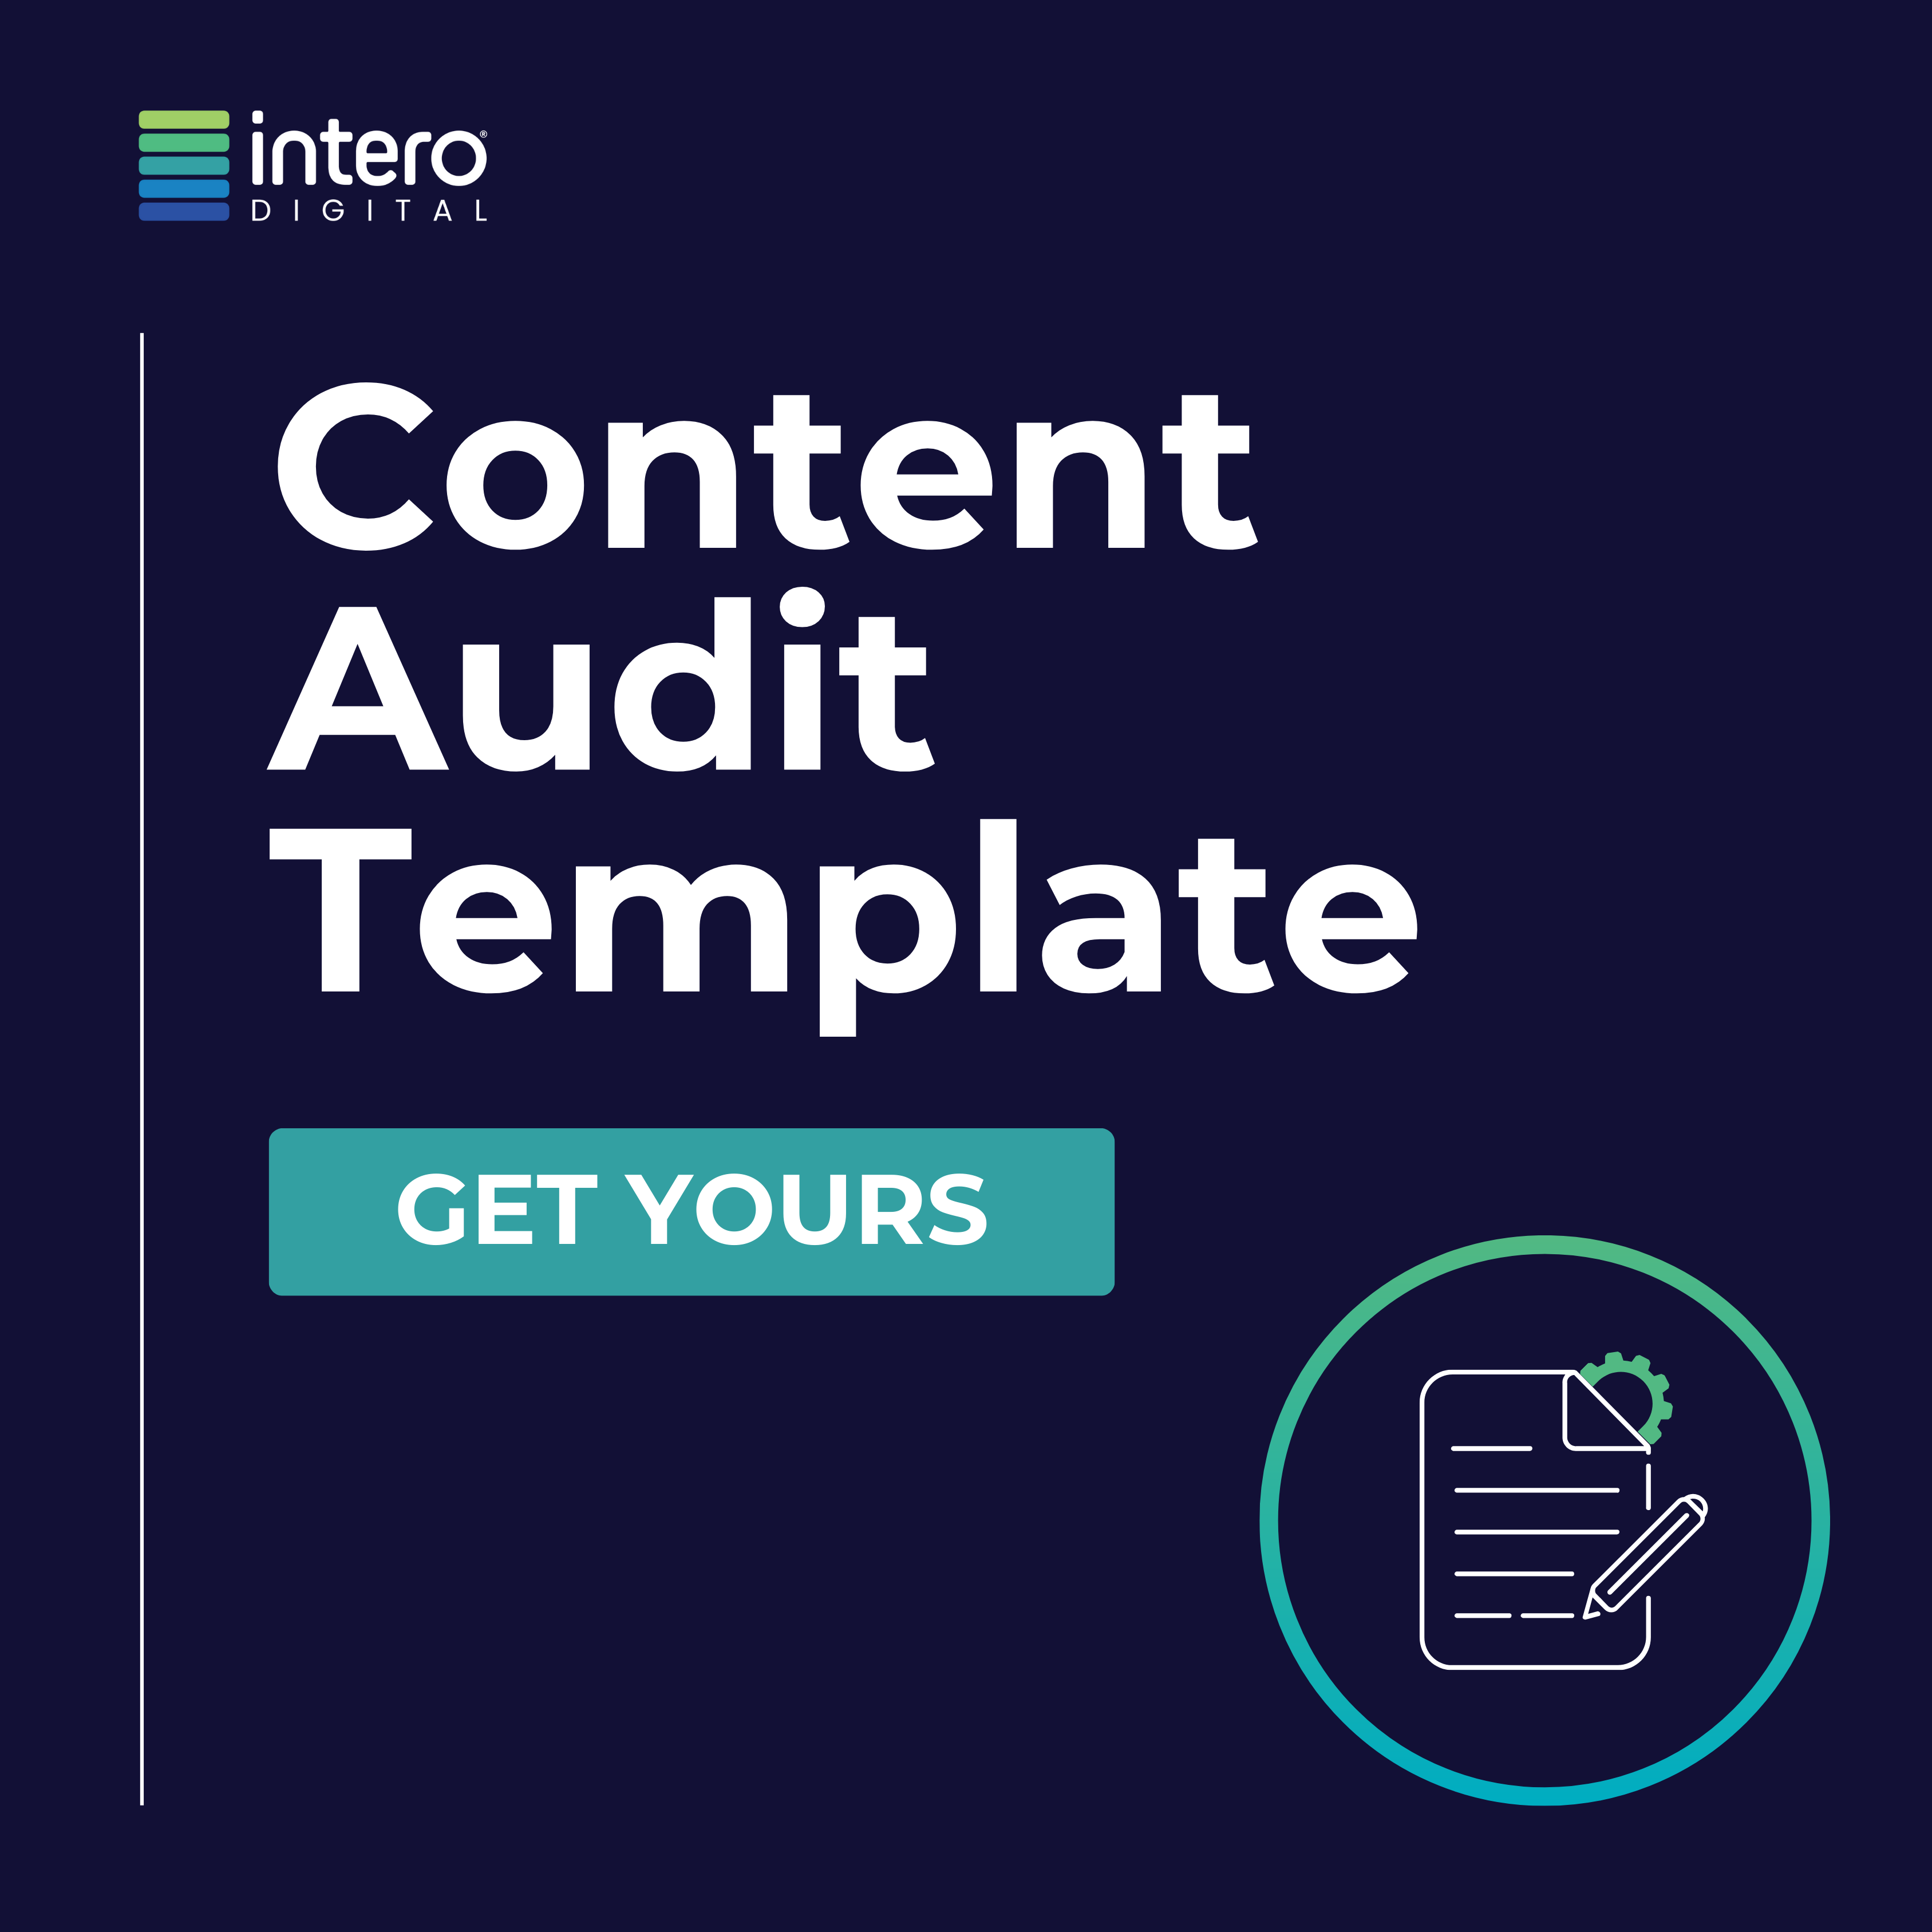 Content Audit Template - Get Yours